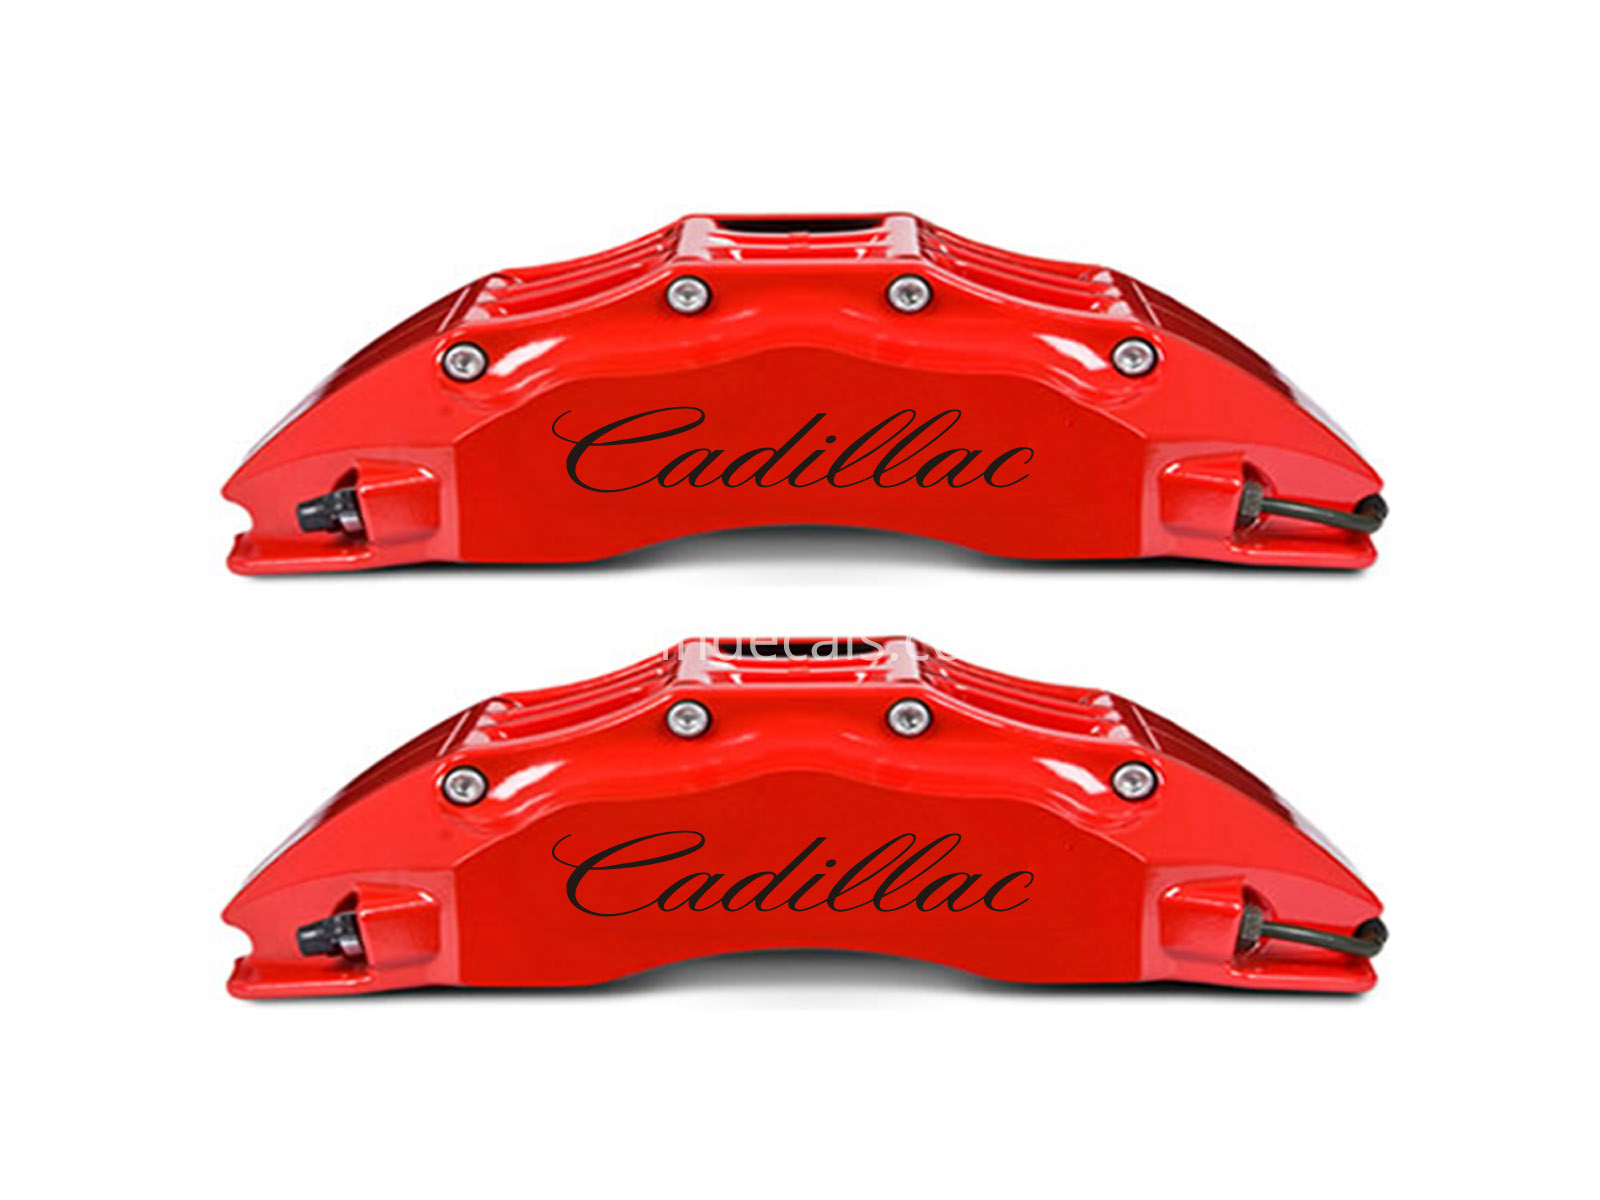 6 x Cadillac Stickers for Brakes - Black